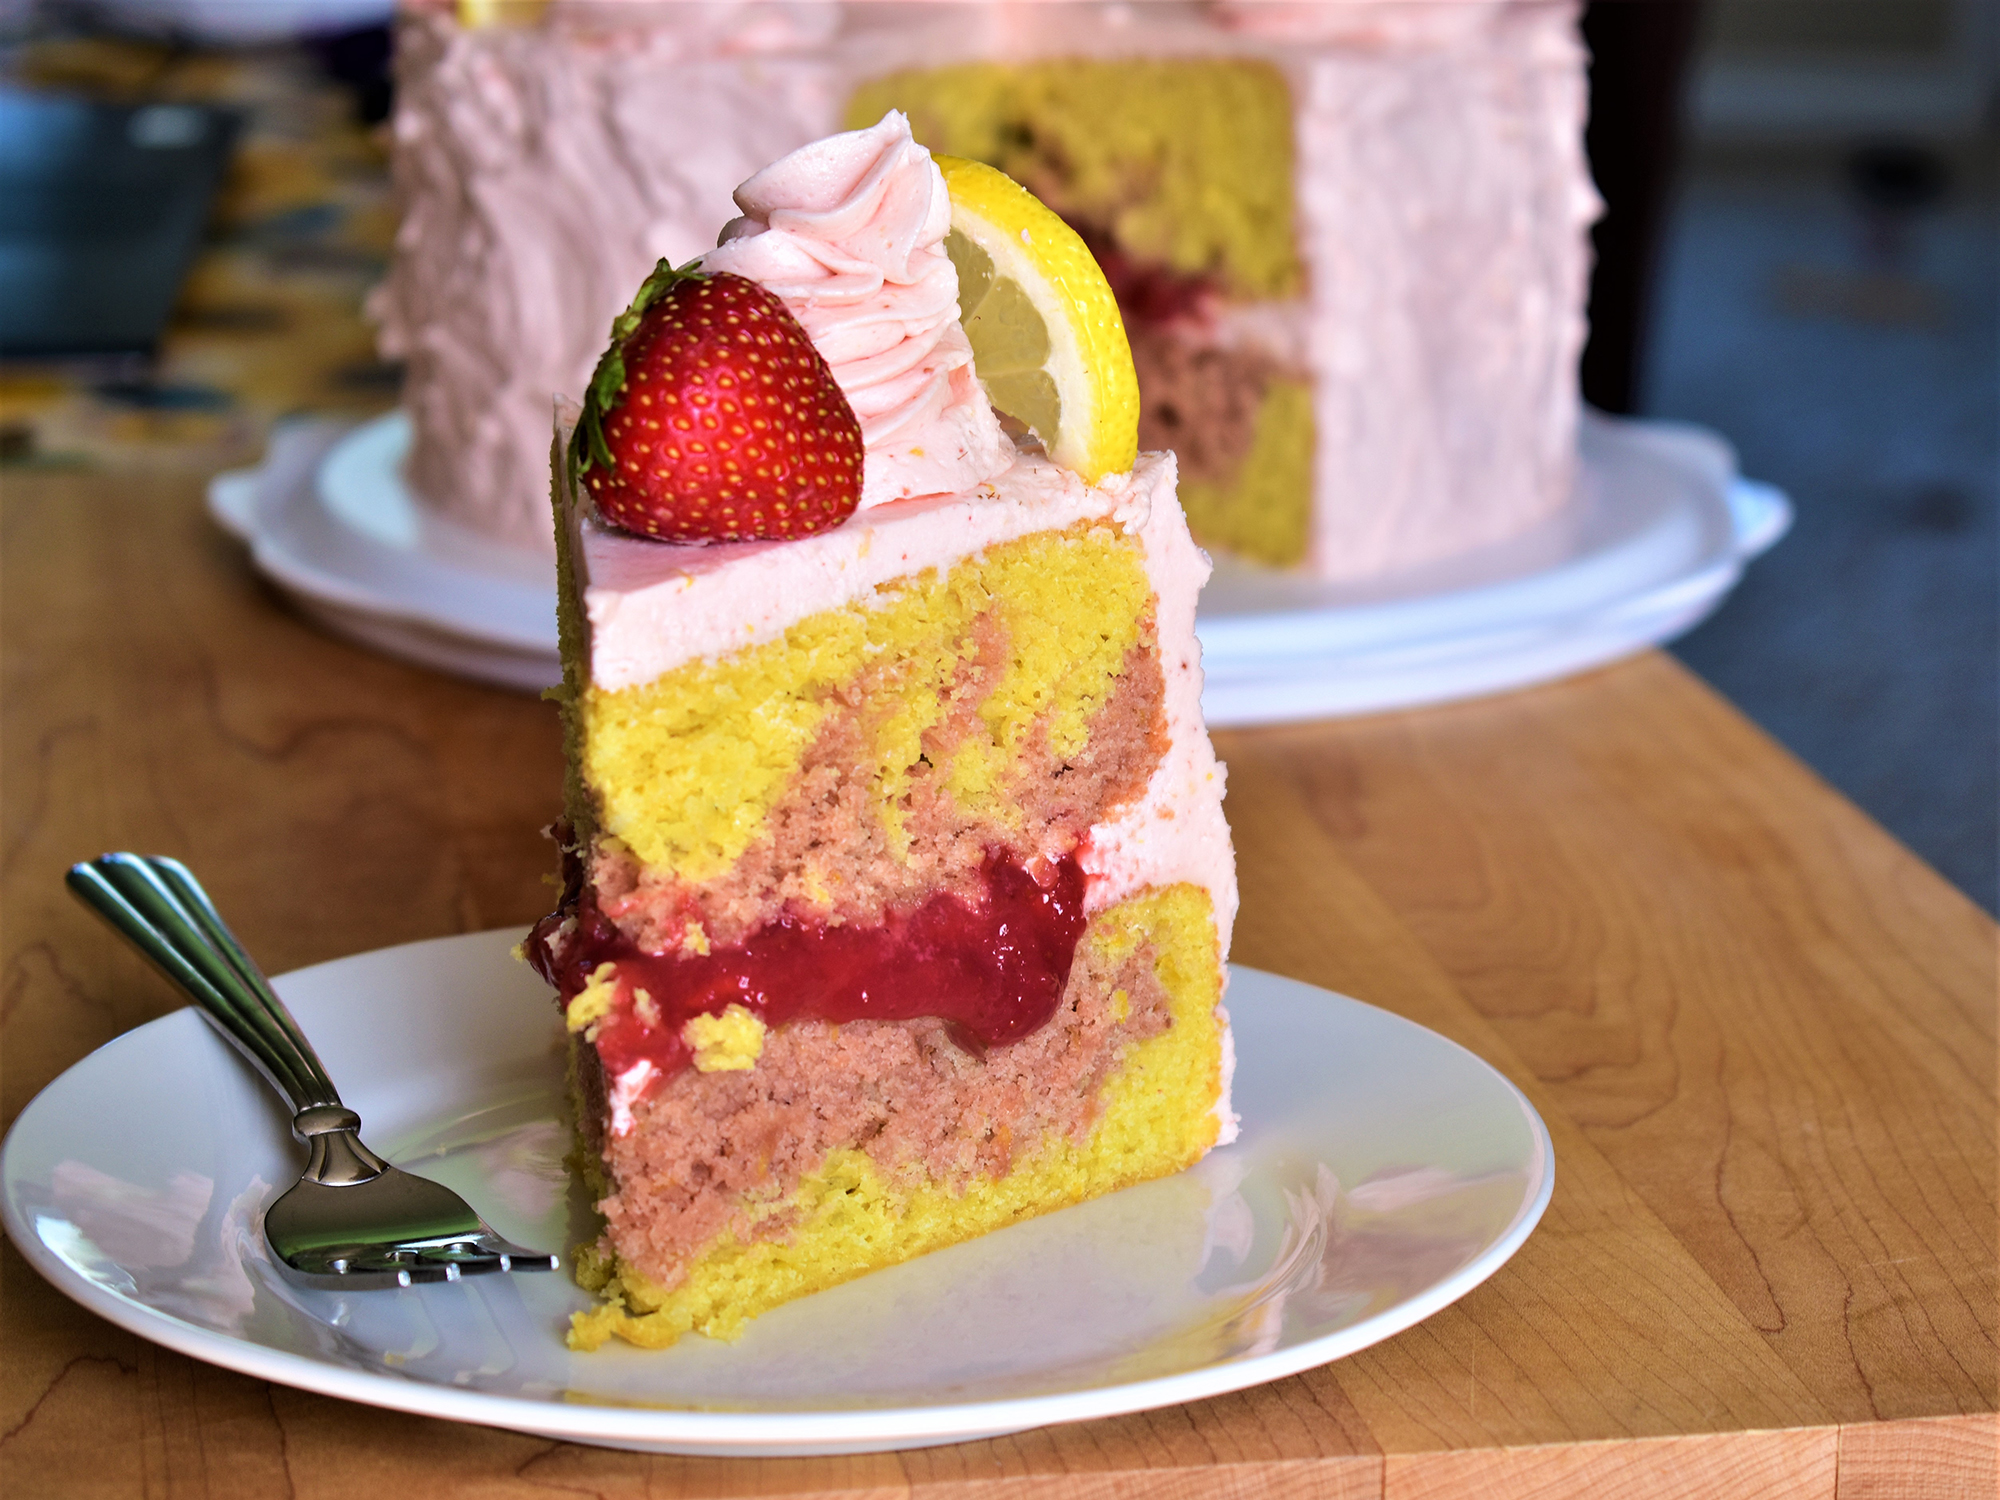 close up view of a slice of Strawberry Lemonade Cake garnished with pink cream, a fresh strawberry and a lemon slice, with Strawberry Lemonade Cake in the background